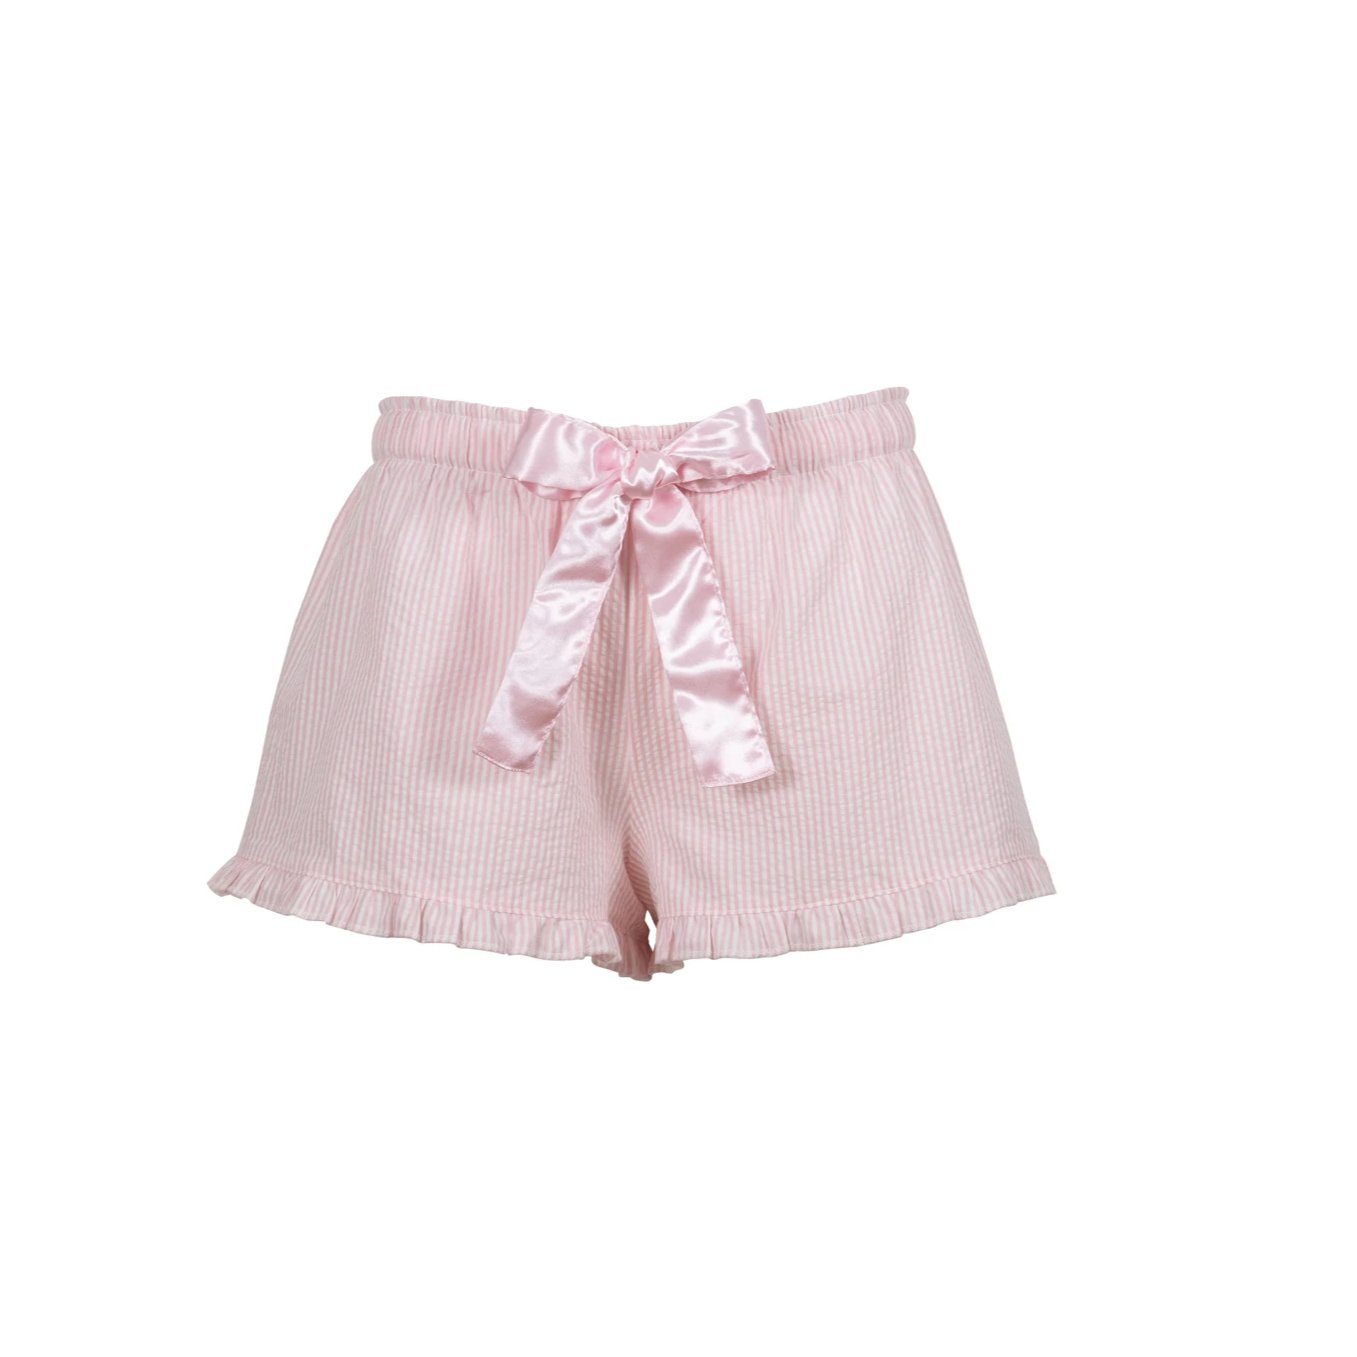 Cotton Candy striped shorts with a pink satin bow.